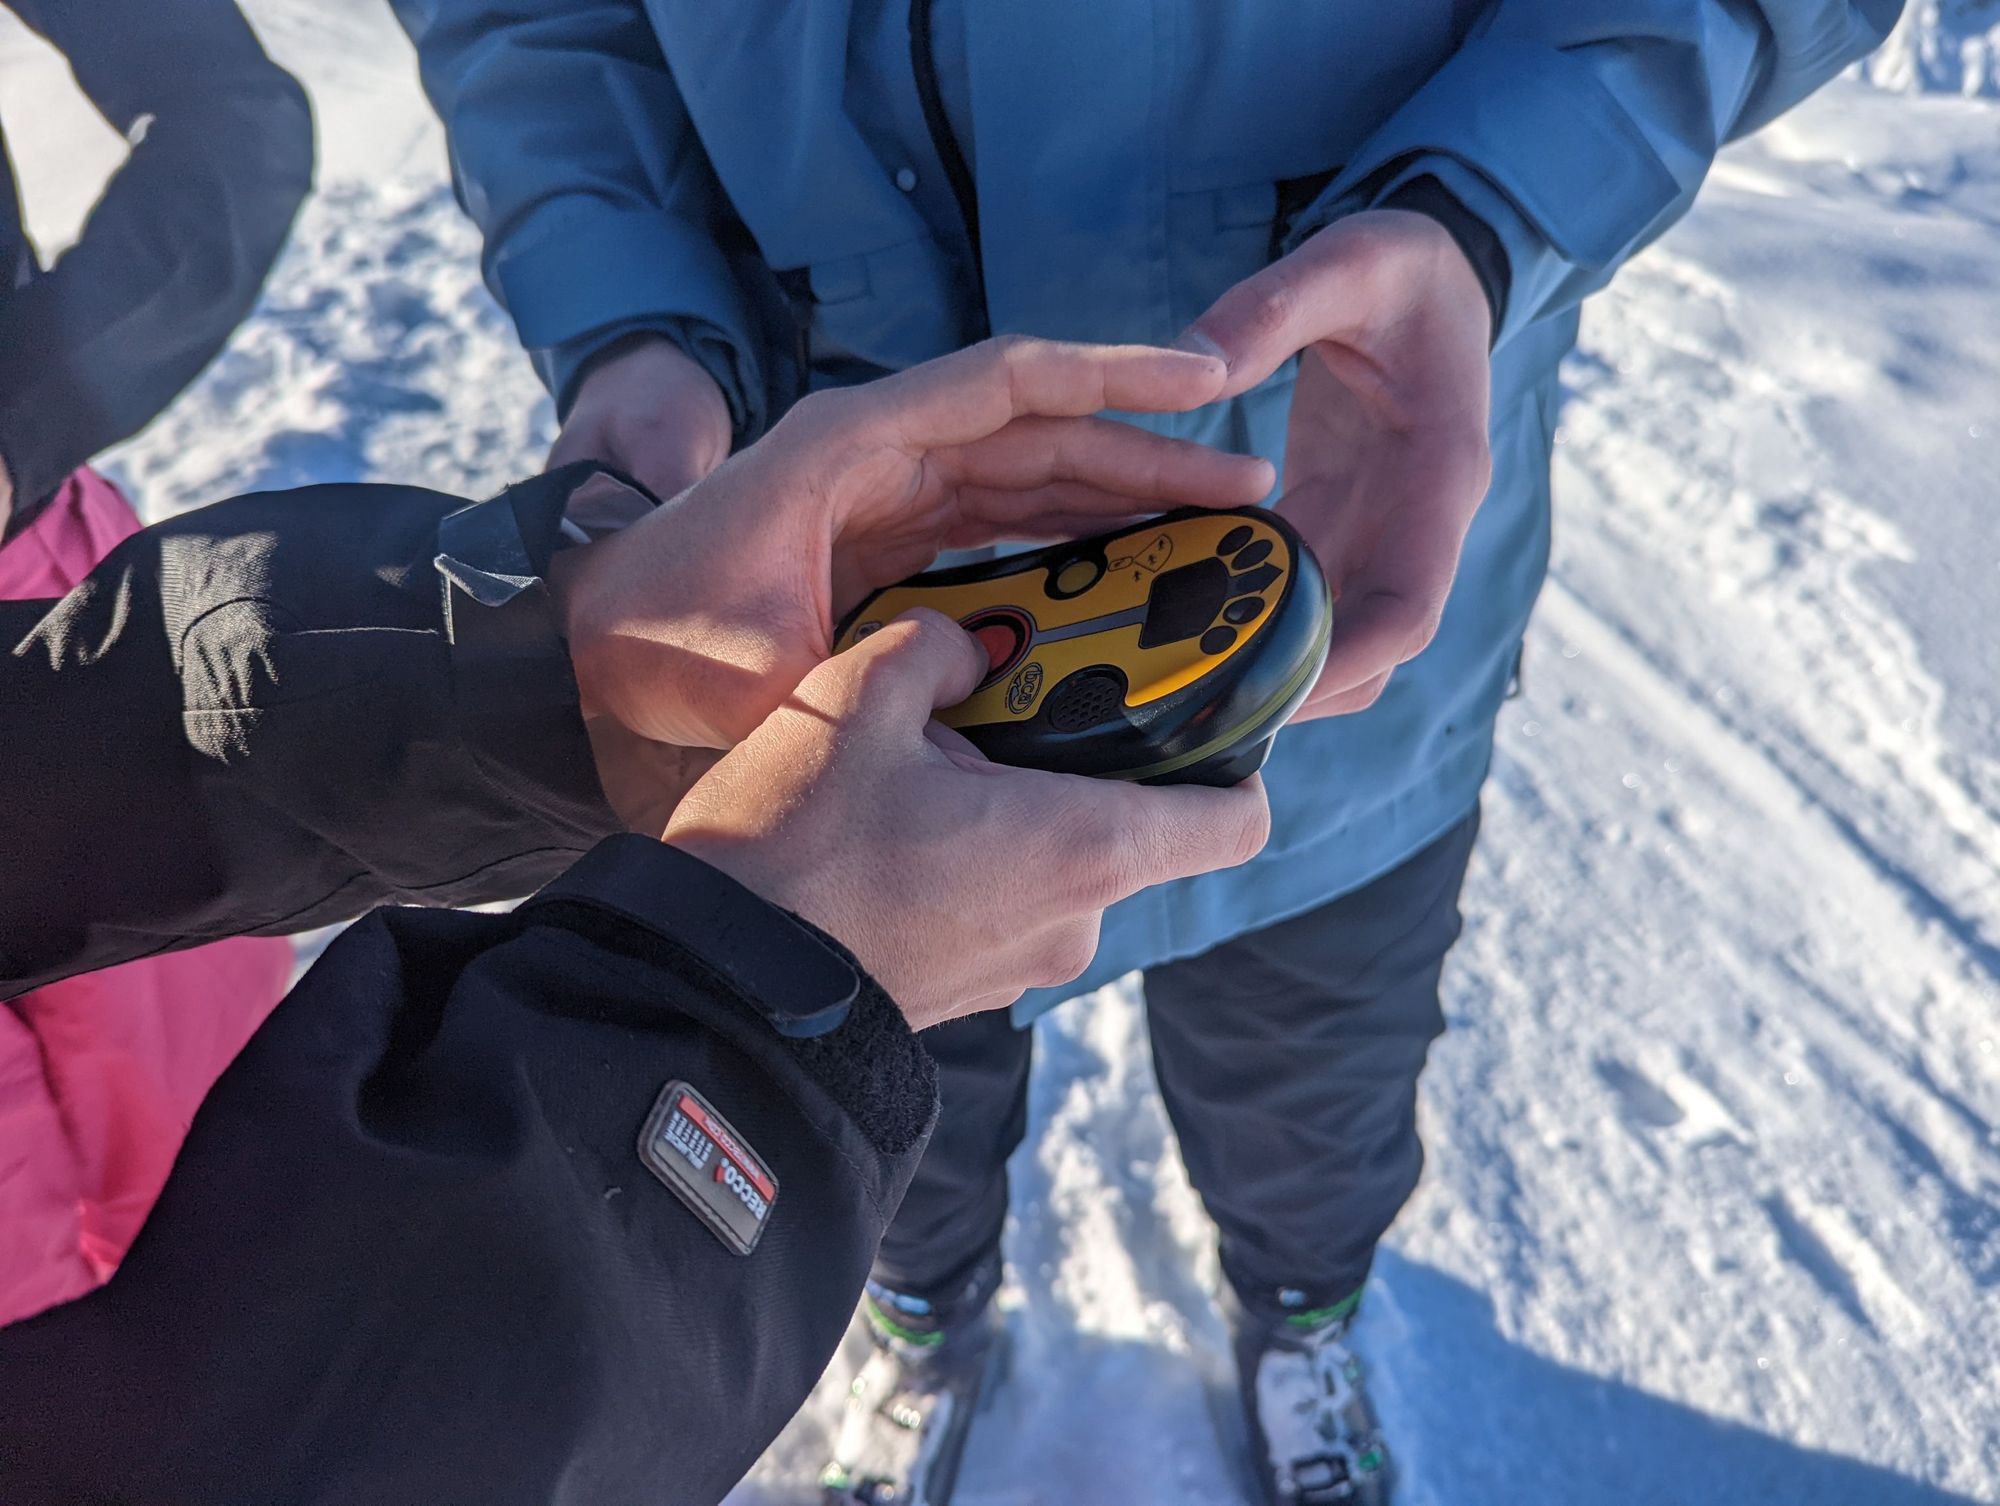 A skier tests an avalanche transceiver